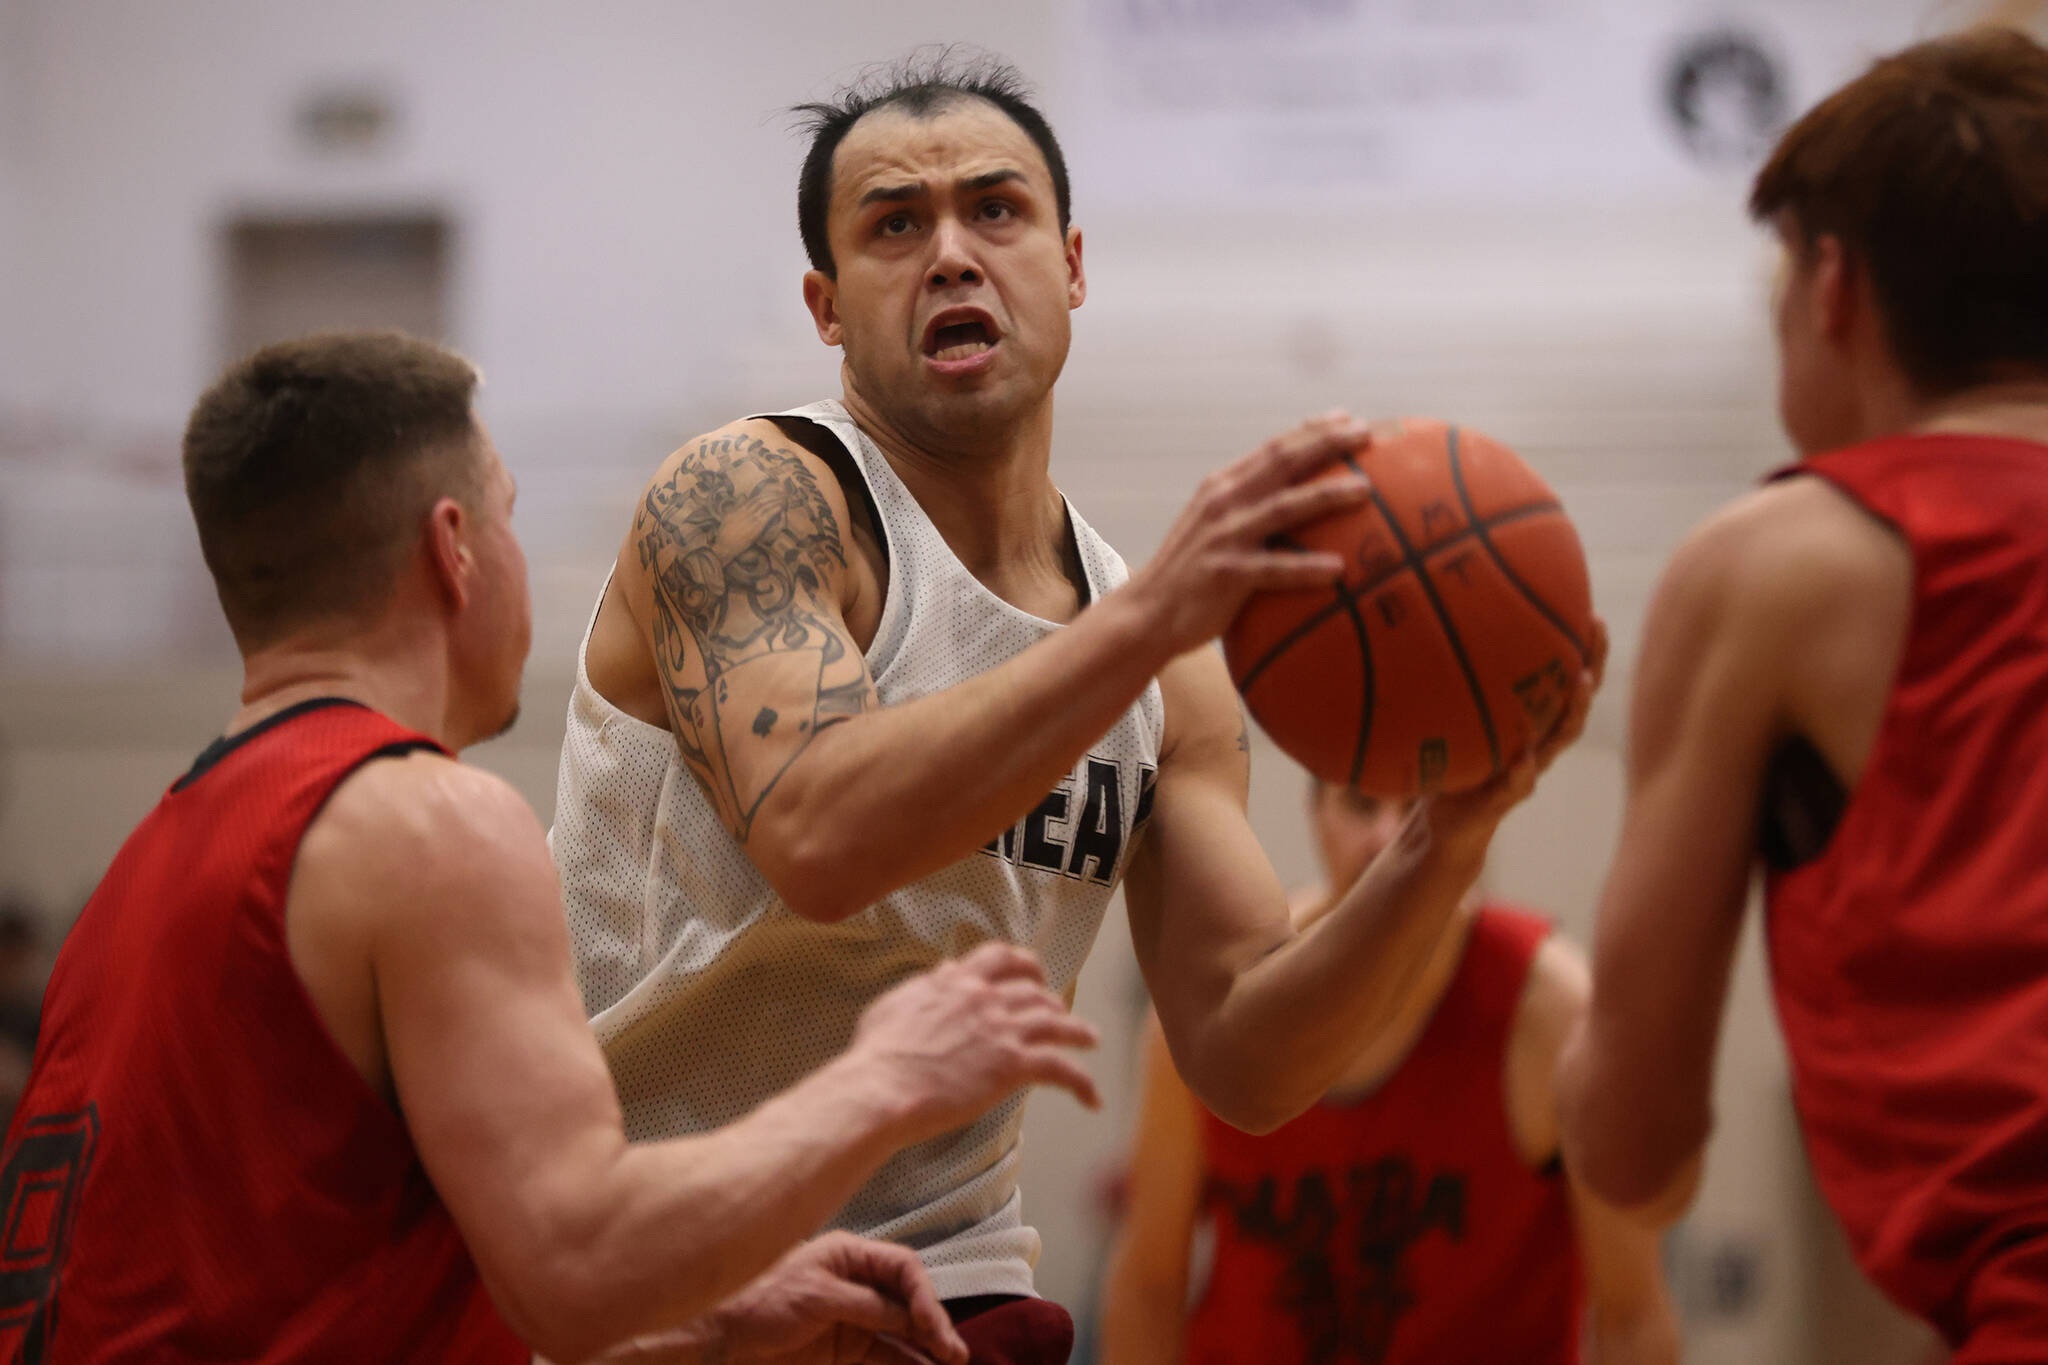 Juneau’s Terrence Wheat drives to the hoop late in a Juneau B Bracket win against Hydaburg. The Thursday night win punched Juneau’s ticket to the B Bracket championship game on Saturday. (Ben Hohenstatt / Juneau Empire)